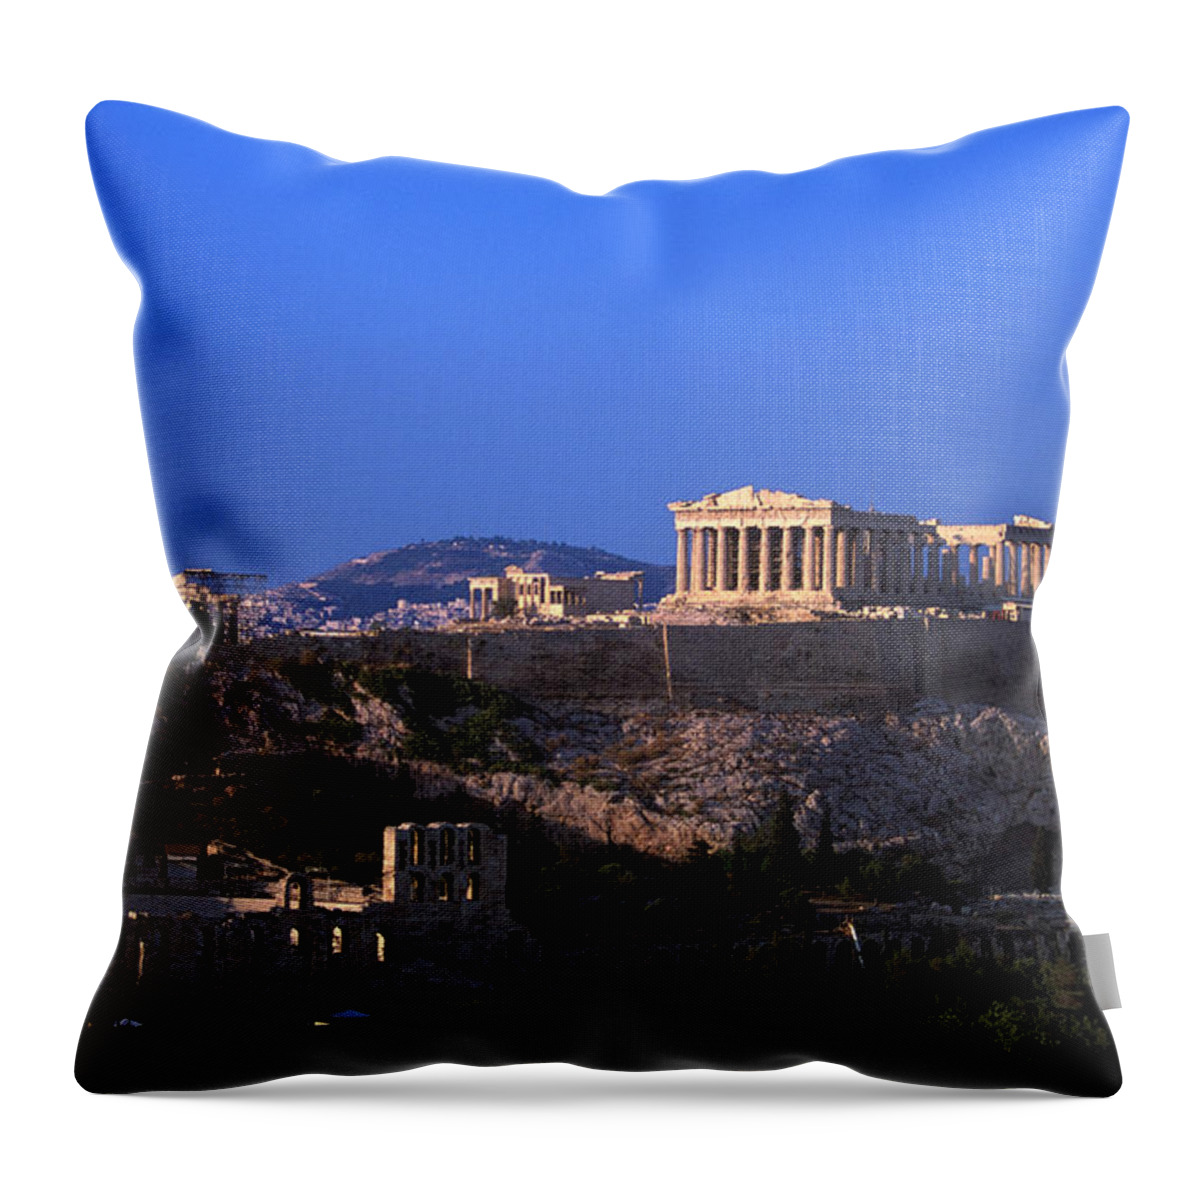 Scenics Throw Pillow featuring the photograph Parthenon From Filopapou At Dusk by Walter Bibikow